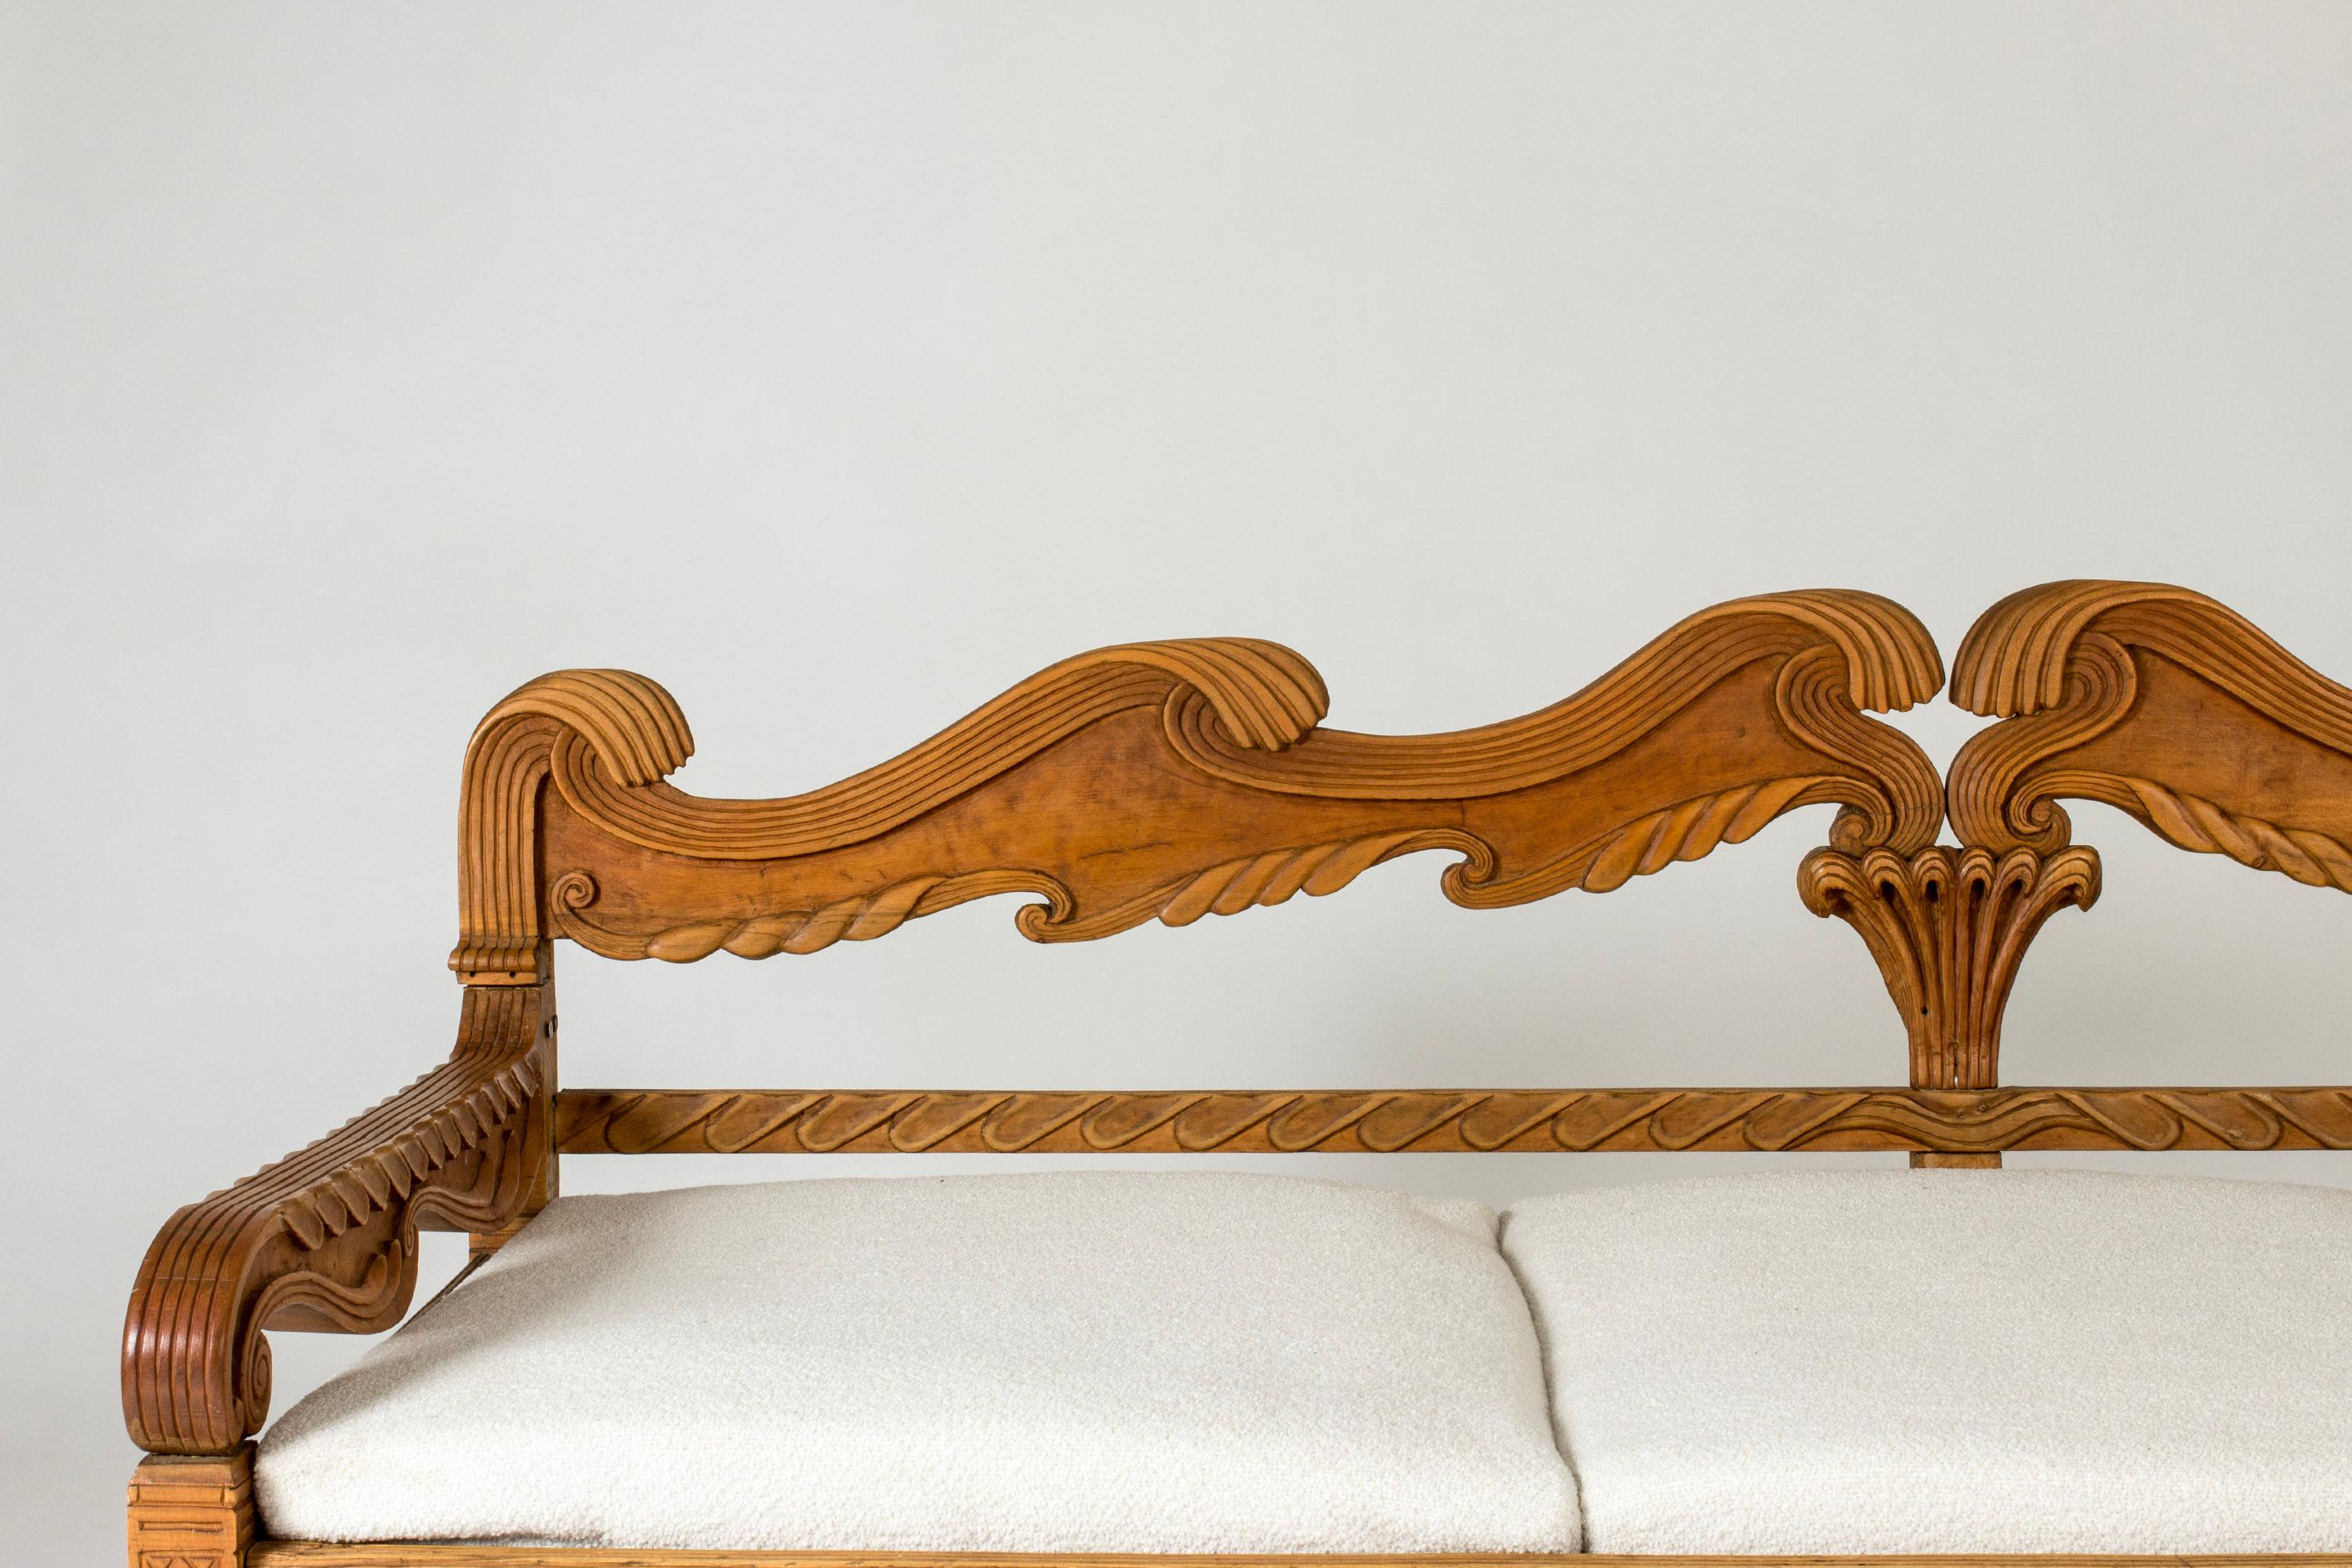 Stunning sofa by Knut Fjaestad, made from oak with a beautiful, intricate carved pattern of leaves, waves and lines that cover the whole piece.

Knut Fjaestad was a merchant in Stockholm, who started making wooden furniture in the first decade of